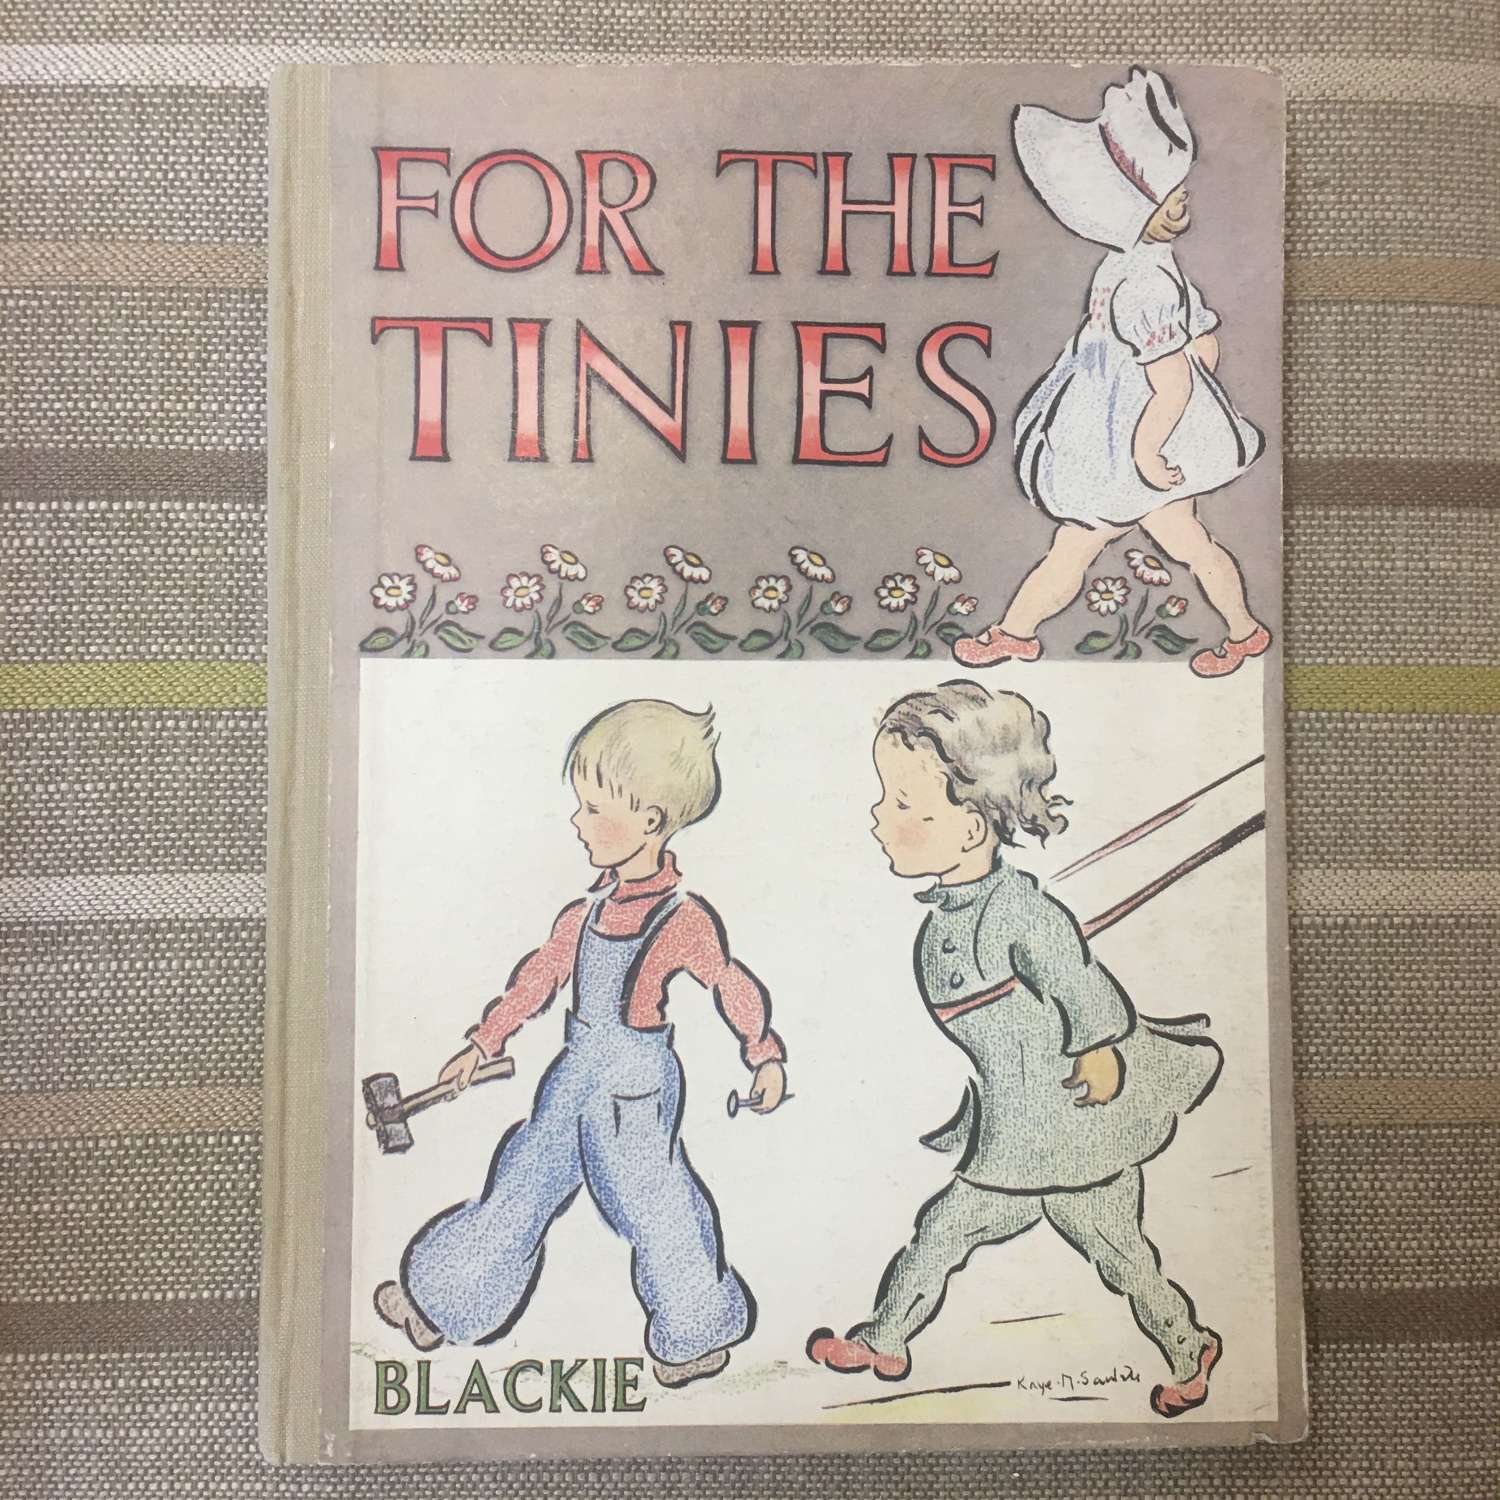 For the Tinies published by Blackie & Sons